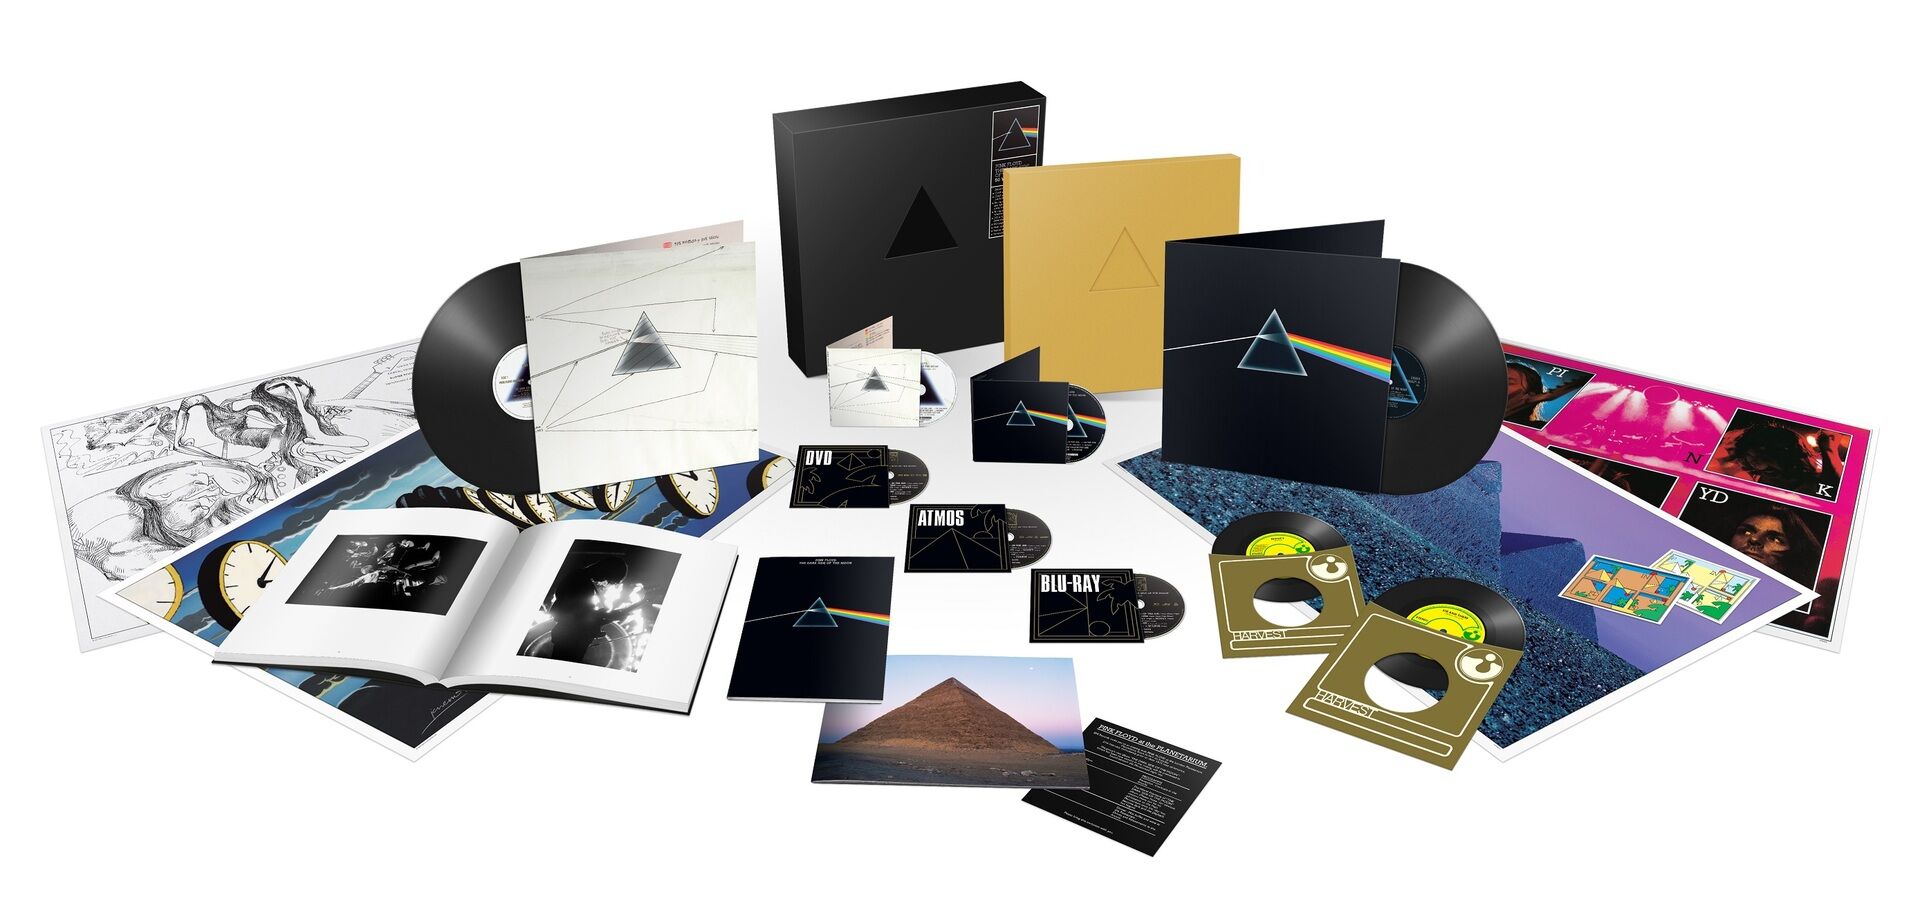 PINK FLOYD - The Dark Side Of The Moon - 50th Anniversary [DELUXE BOX SET BOXSET]